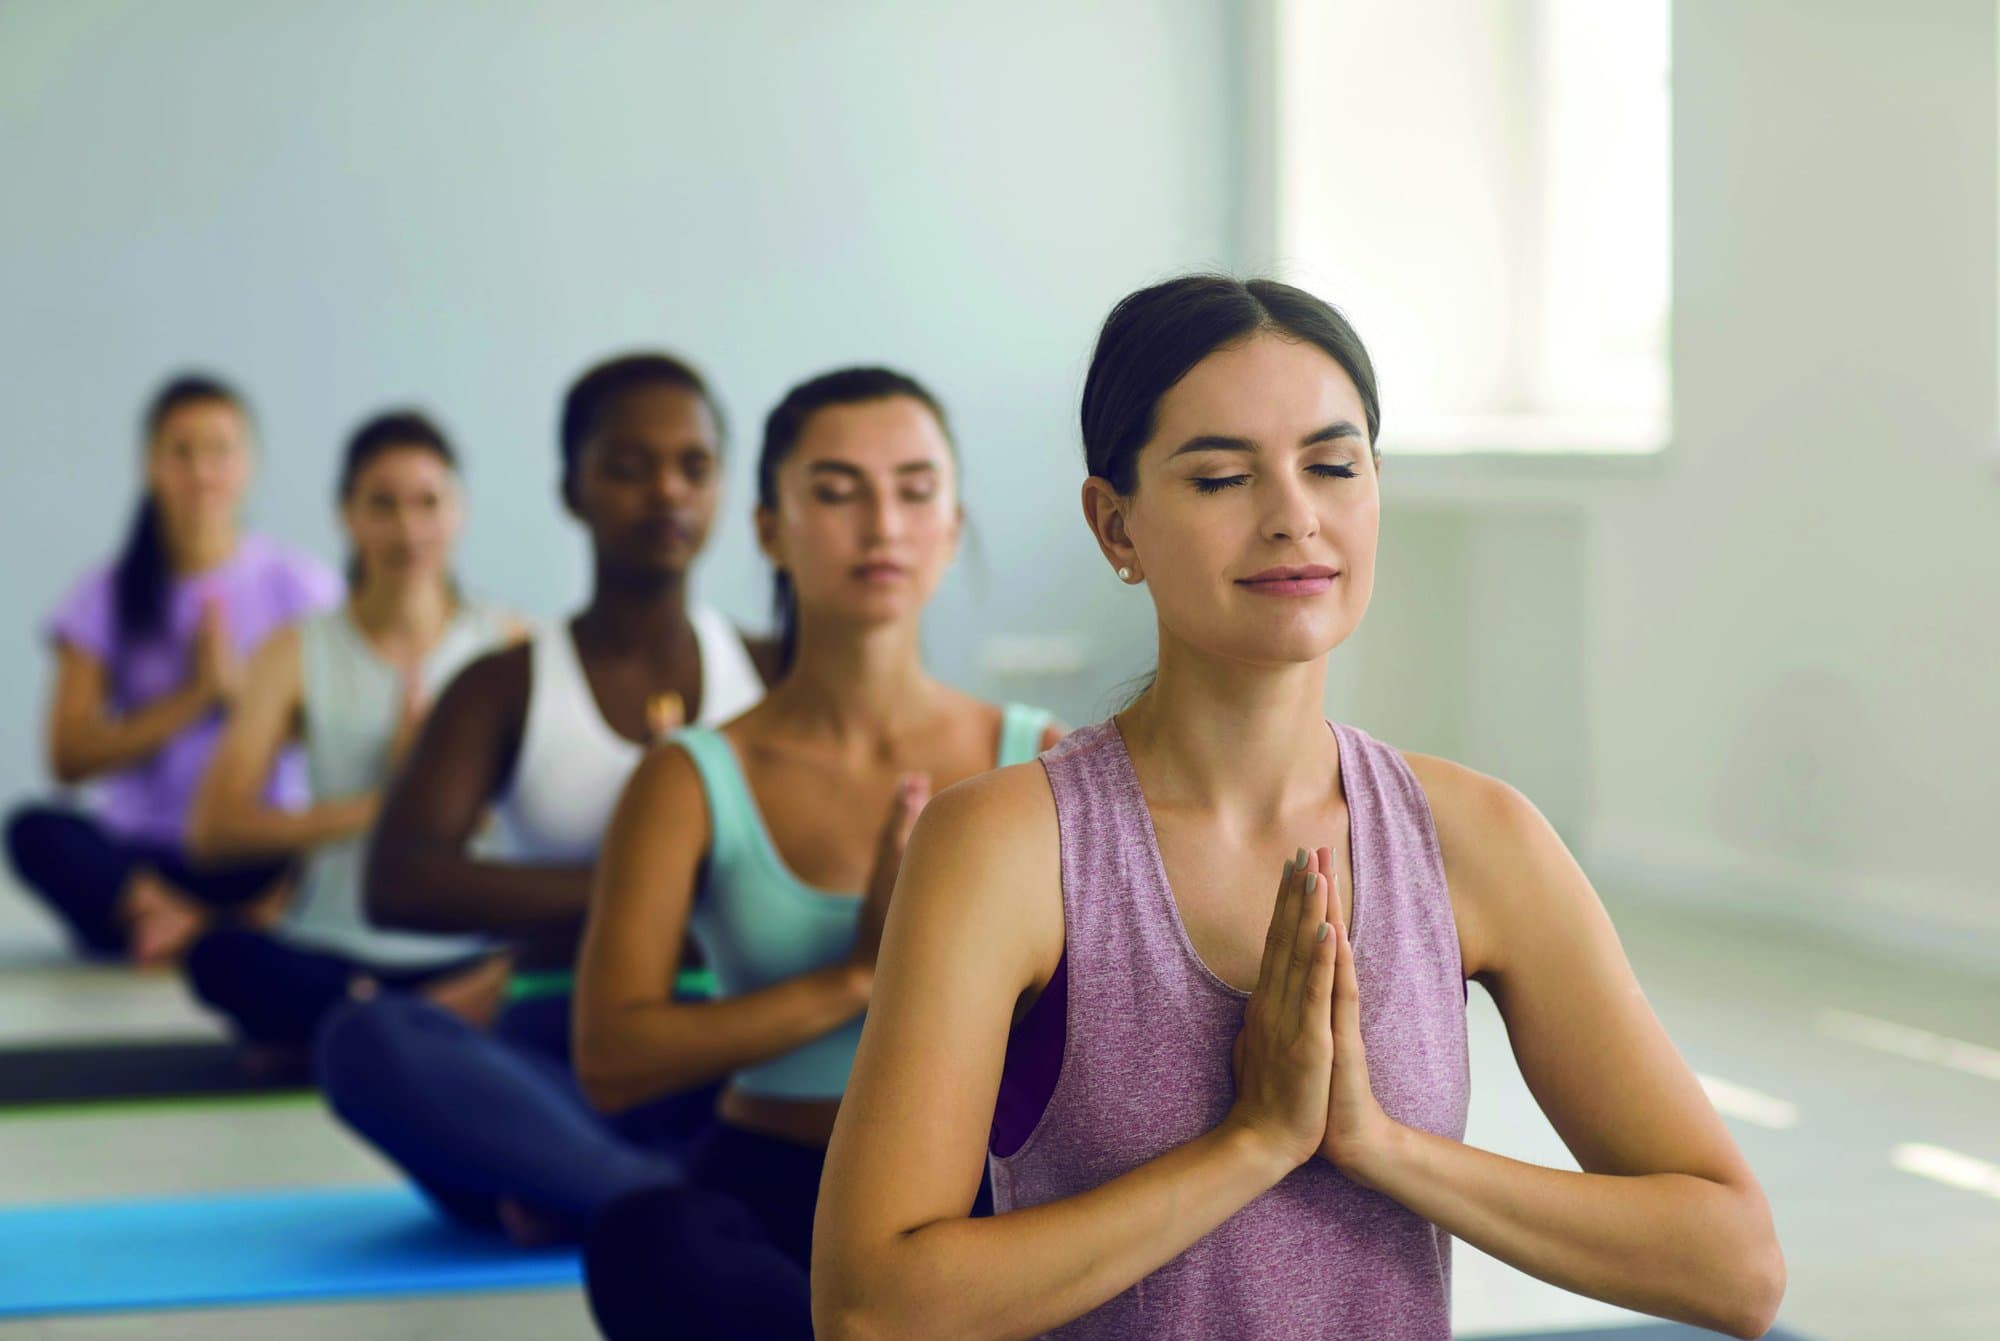 Portrait of a relaxed athletic woman enjoying meditation with closed eyes at a yoga class at a sports club. Woman sits in a lotus position with folded palms in a group yoga class. Blurred background.